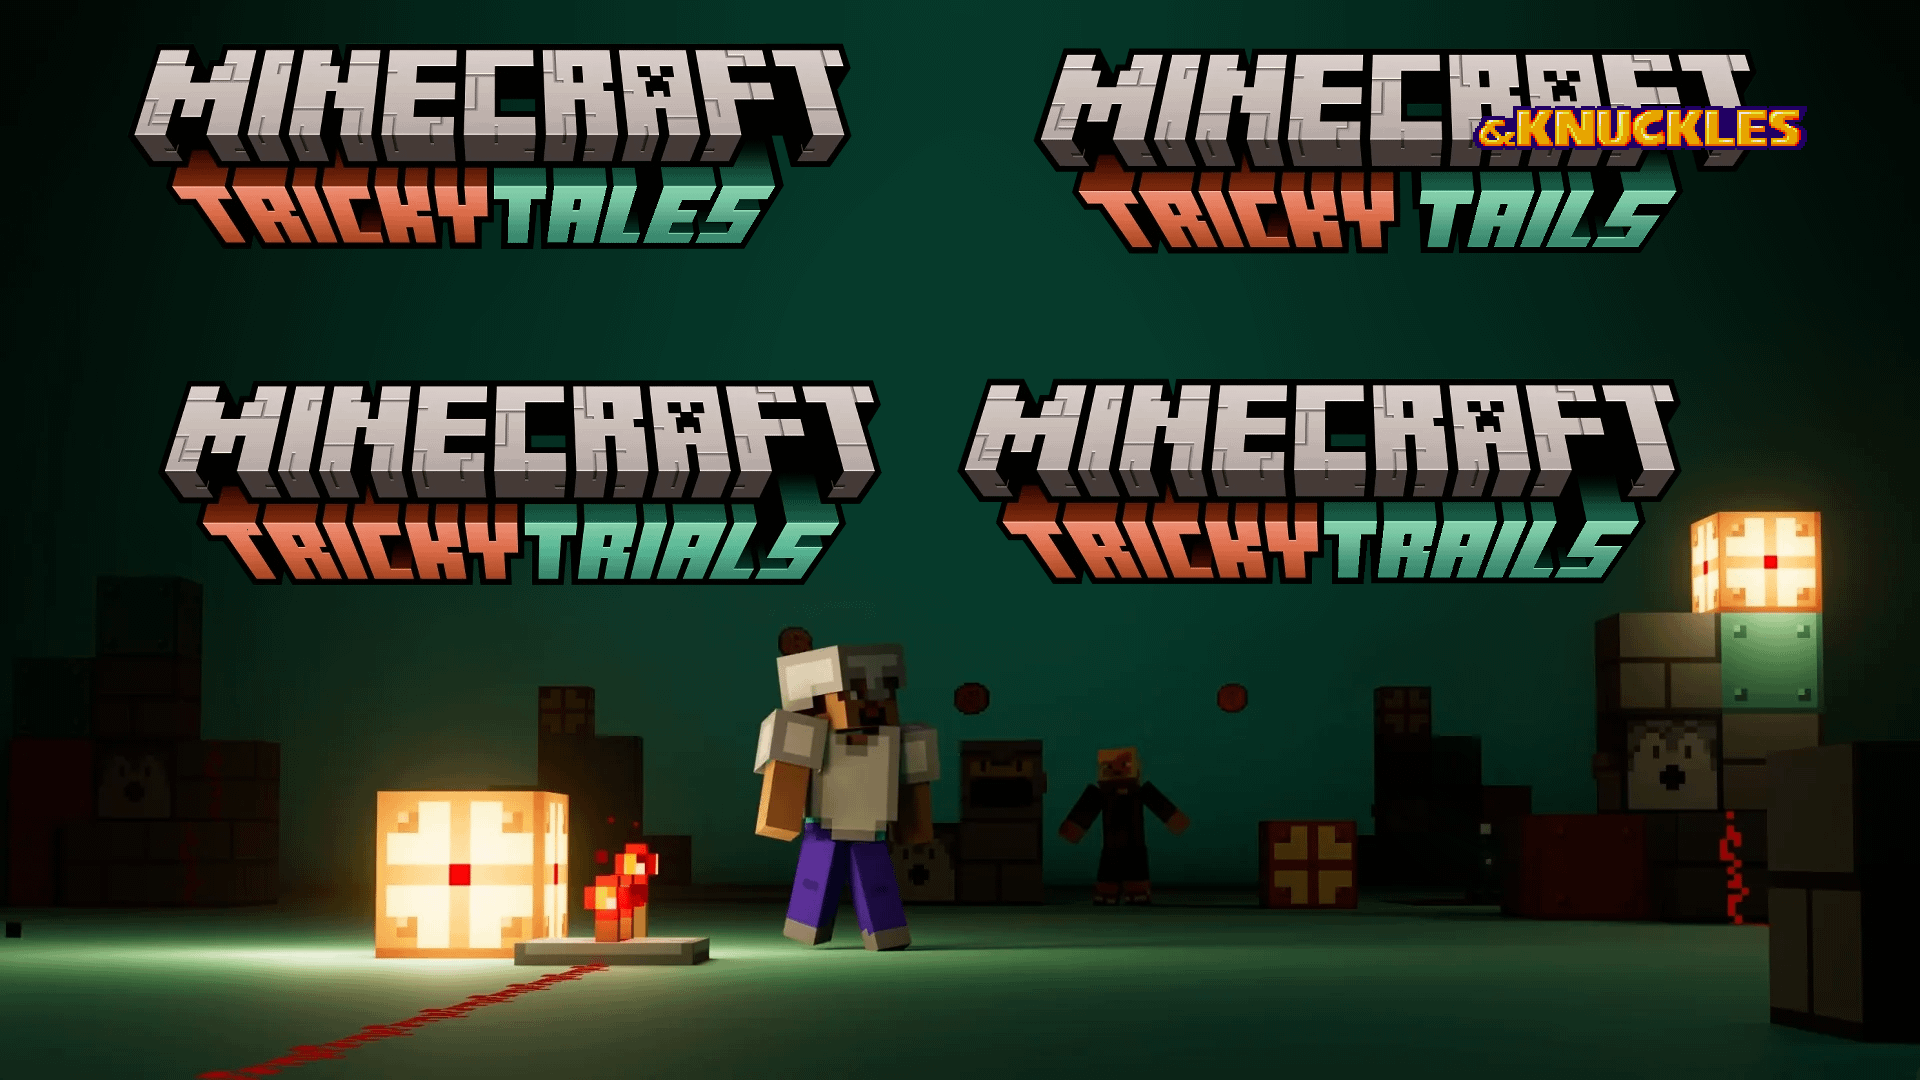 Minecraft Memes - I dropped the new update title next to the last one, what was it supposed to be called again? - Minecraft Meme